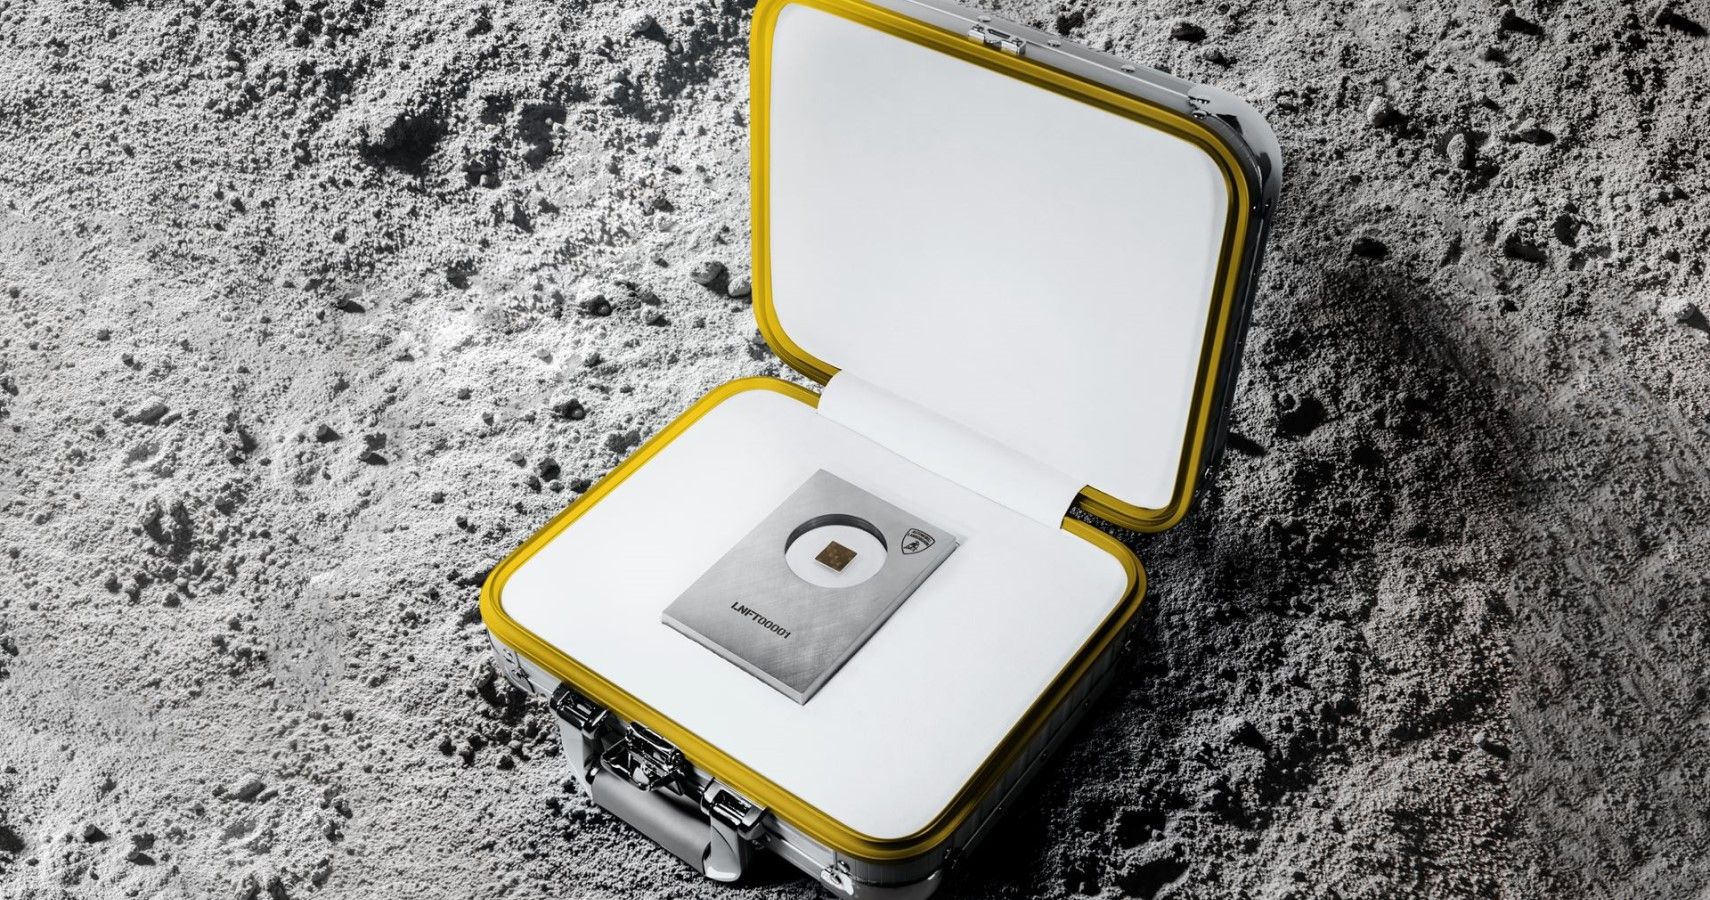 Lamborghini NFT space keys include elements that have been to the moon